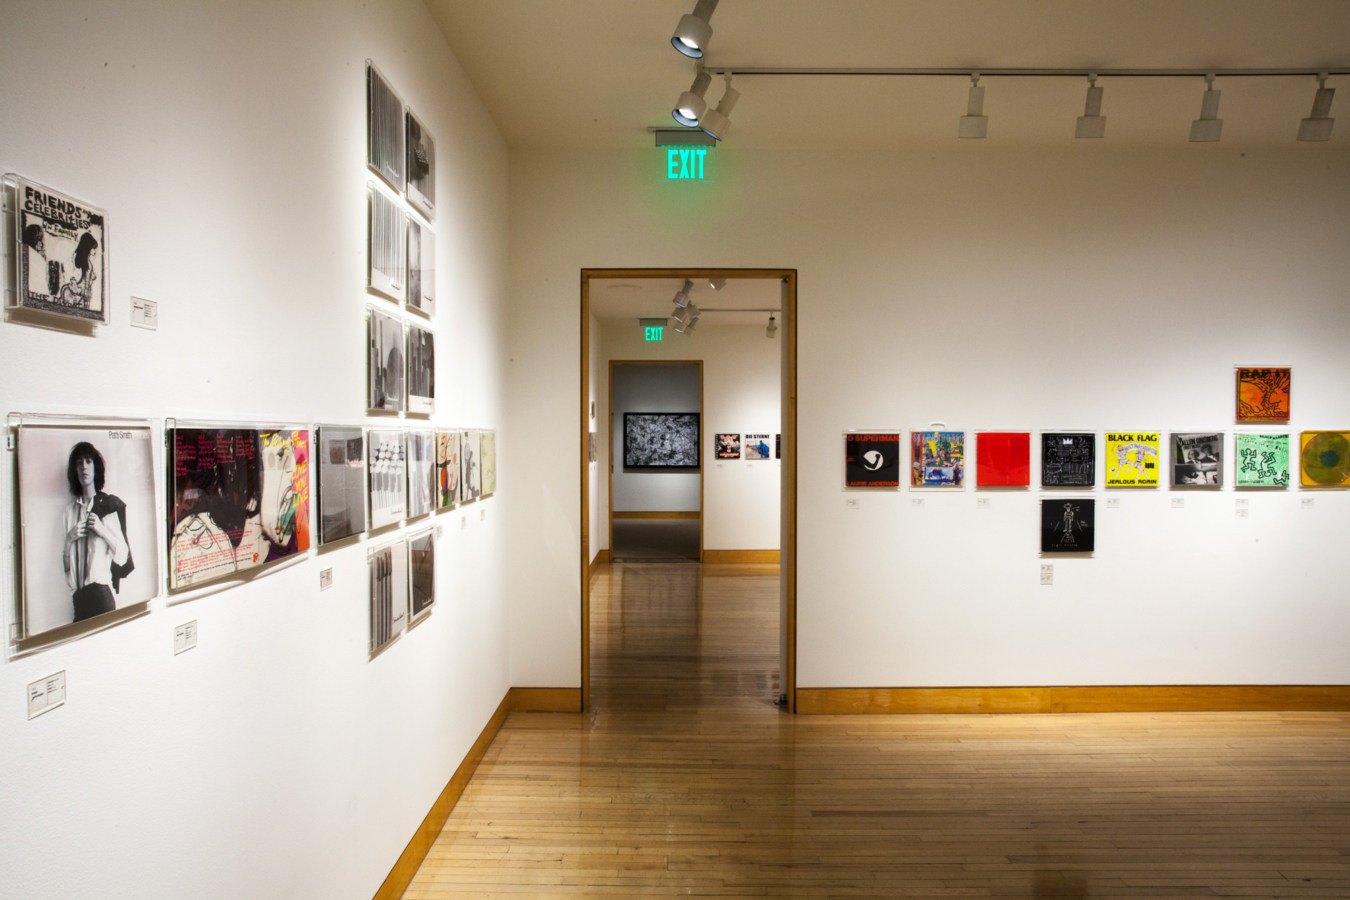 Color image of vinyl records and record sleeves on white gallery walls